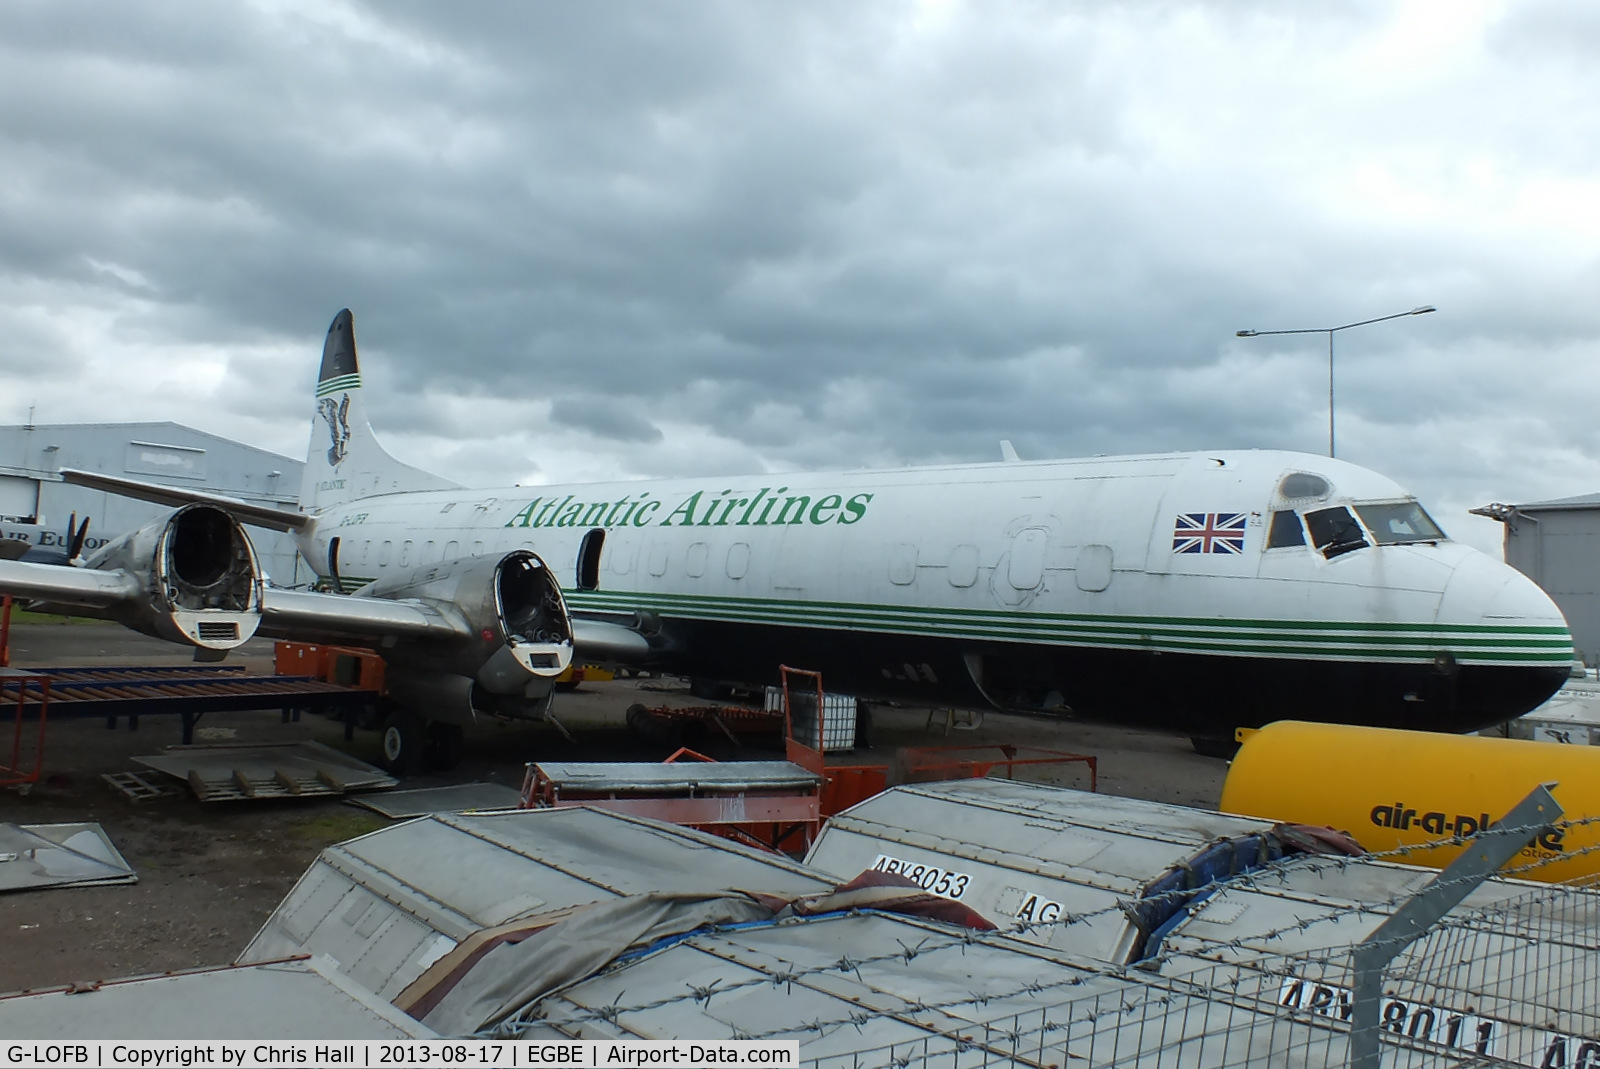 G-LOFB, 1961 Lockheed L-188C(F) Electra C/N 1131, being parted out for Buffalo Airways